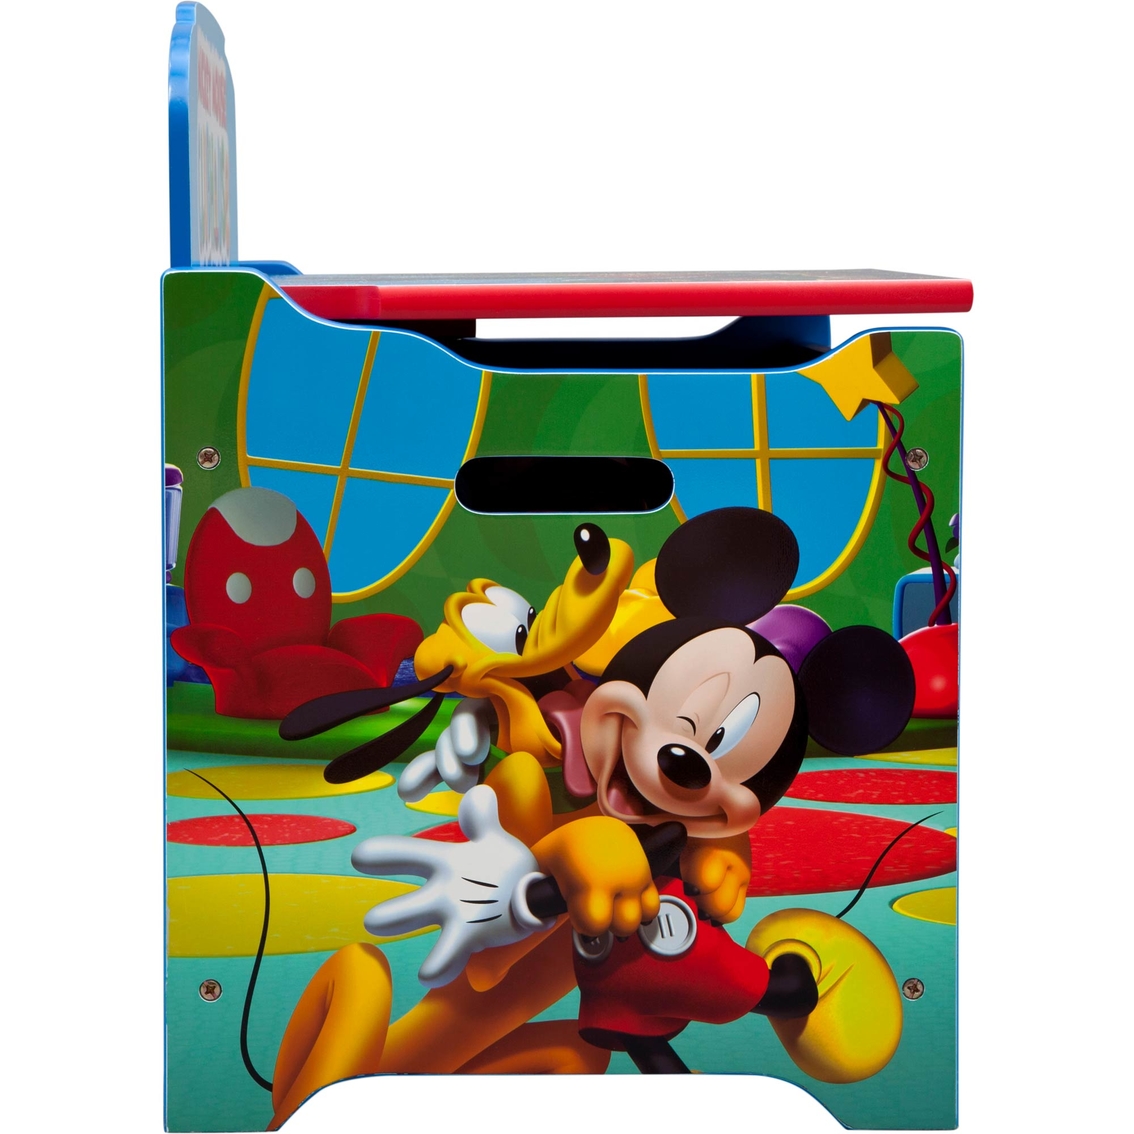 Disney Mickey Mouse Clubhouse Deluxe Toy Box, Toy Storage